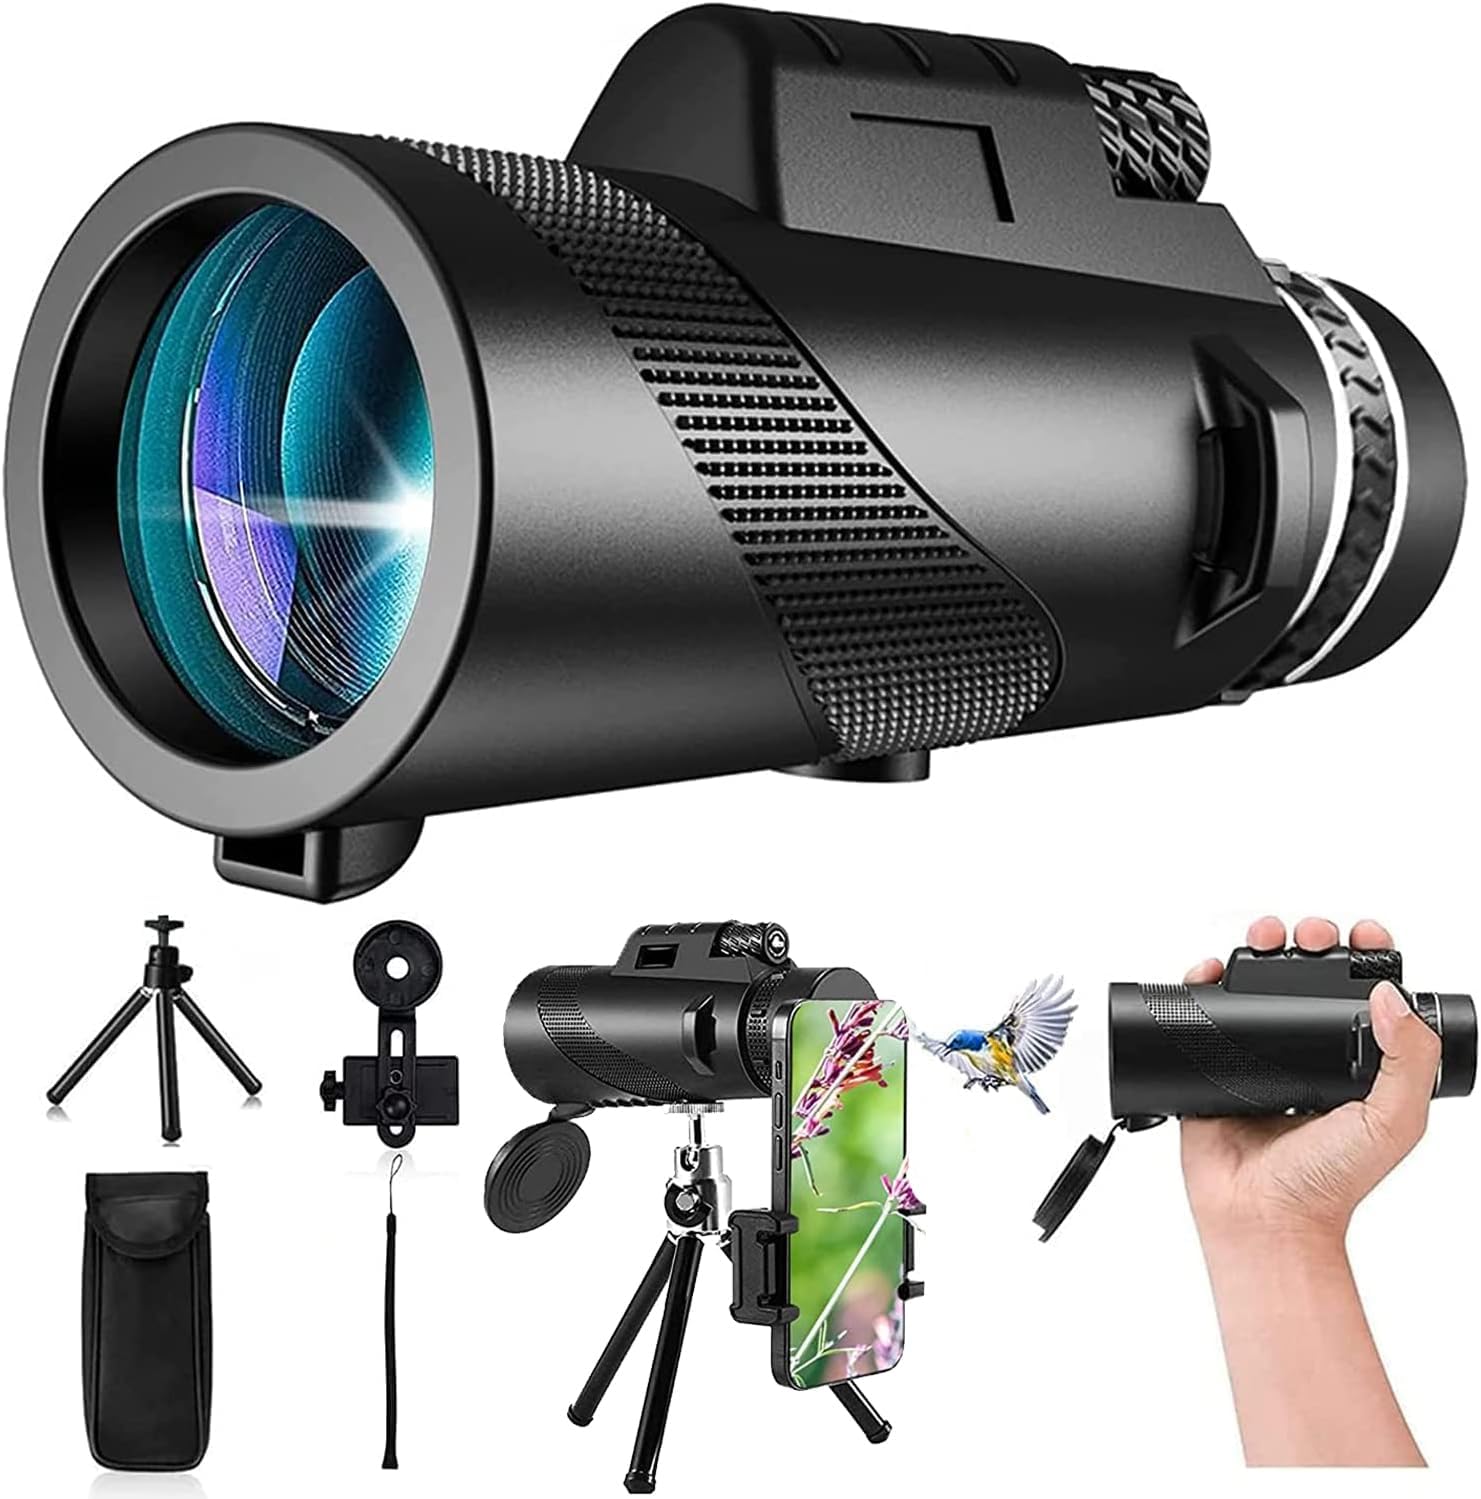 Physiophyx 80X100 Monocular-Telescope High Powered For Smartphone Monoculars For Adults High Definition For Stargazing Hunting Wildlife Bird Watching Travel Camping Hiking